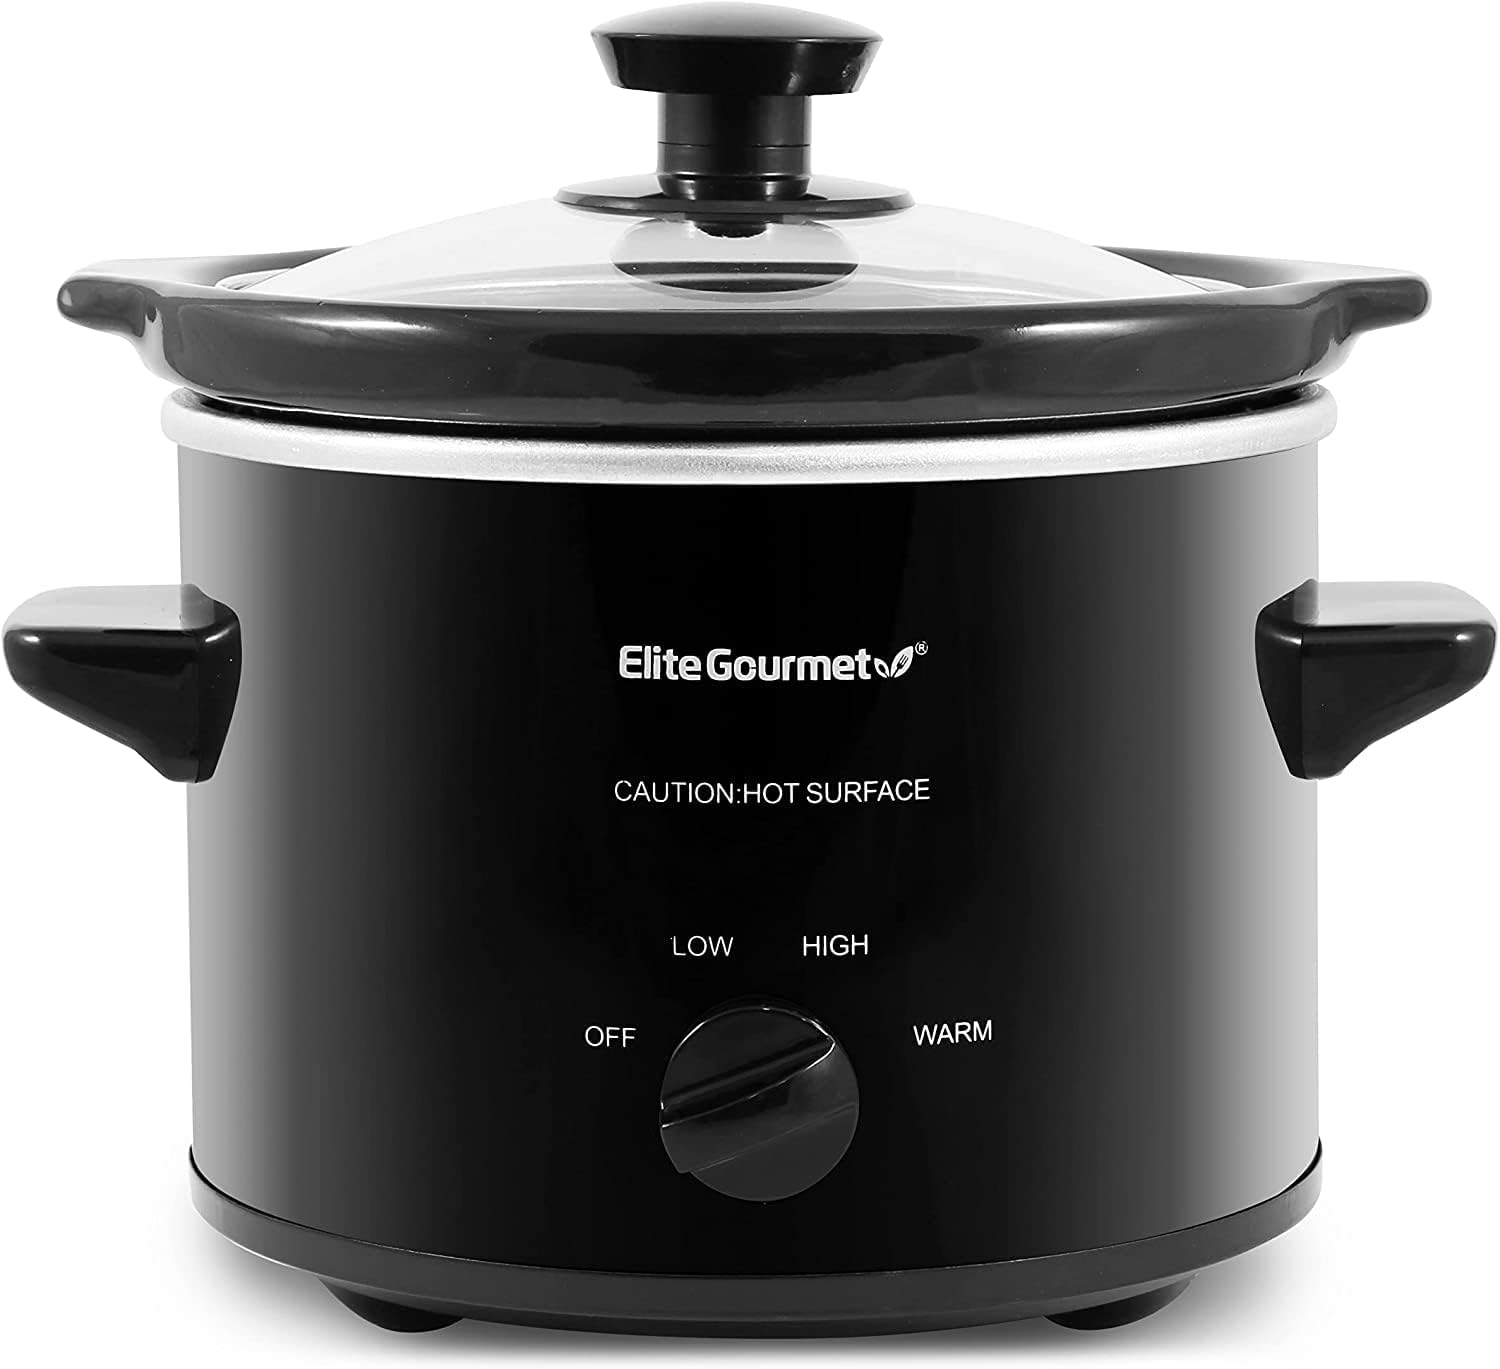 Elite Gourmet MST239X Electric Round Slow Cooker Review